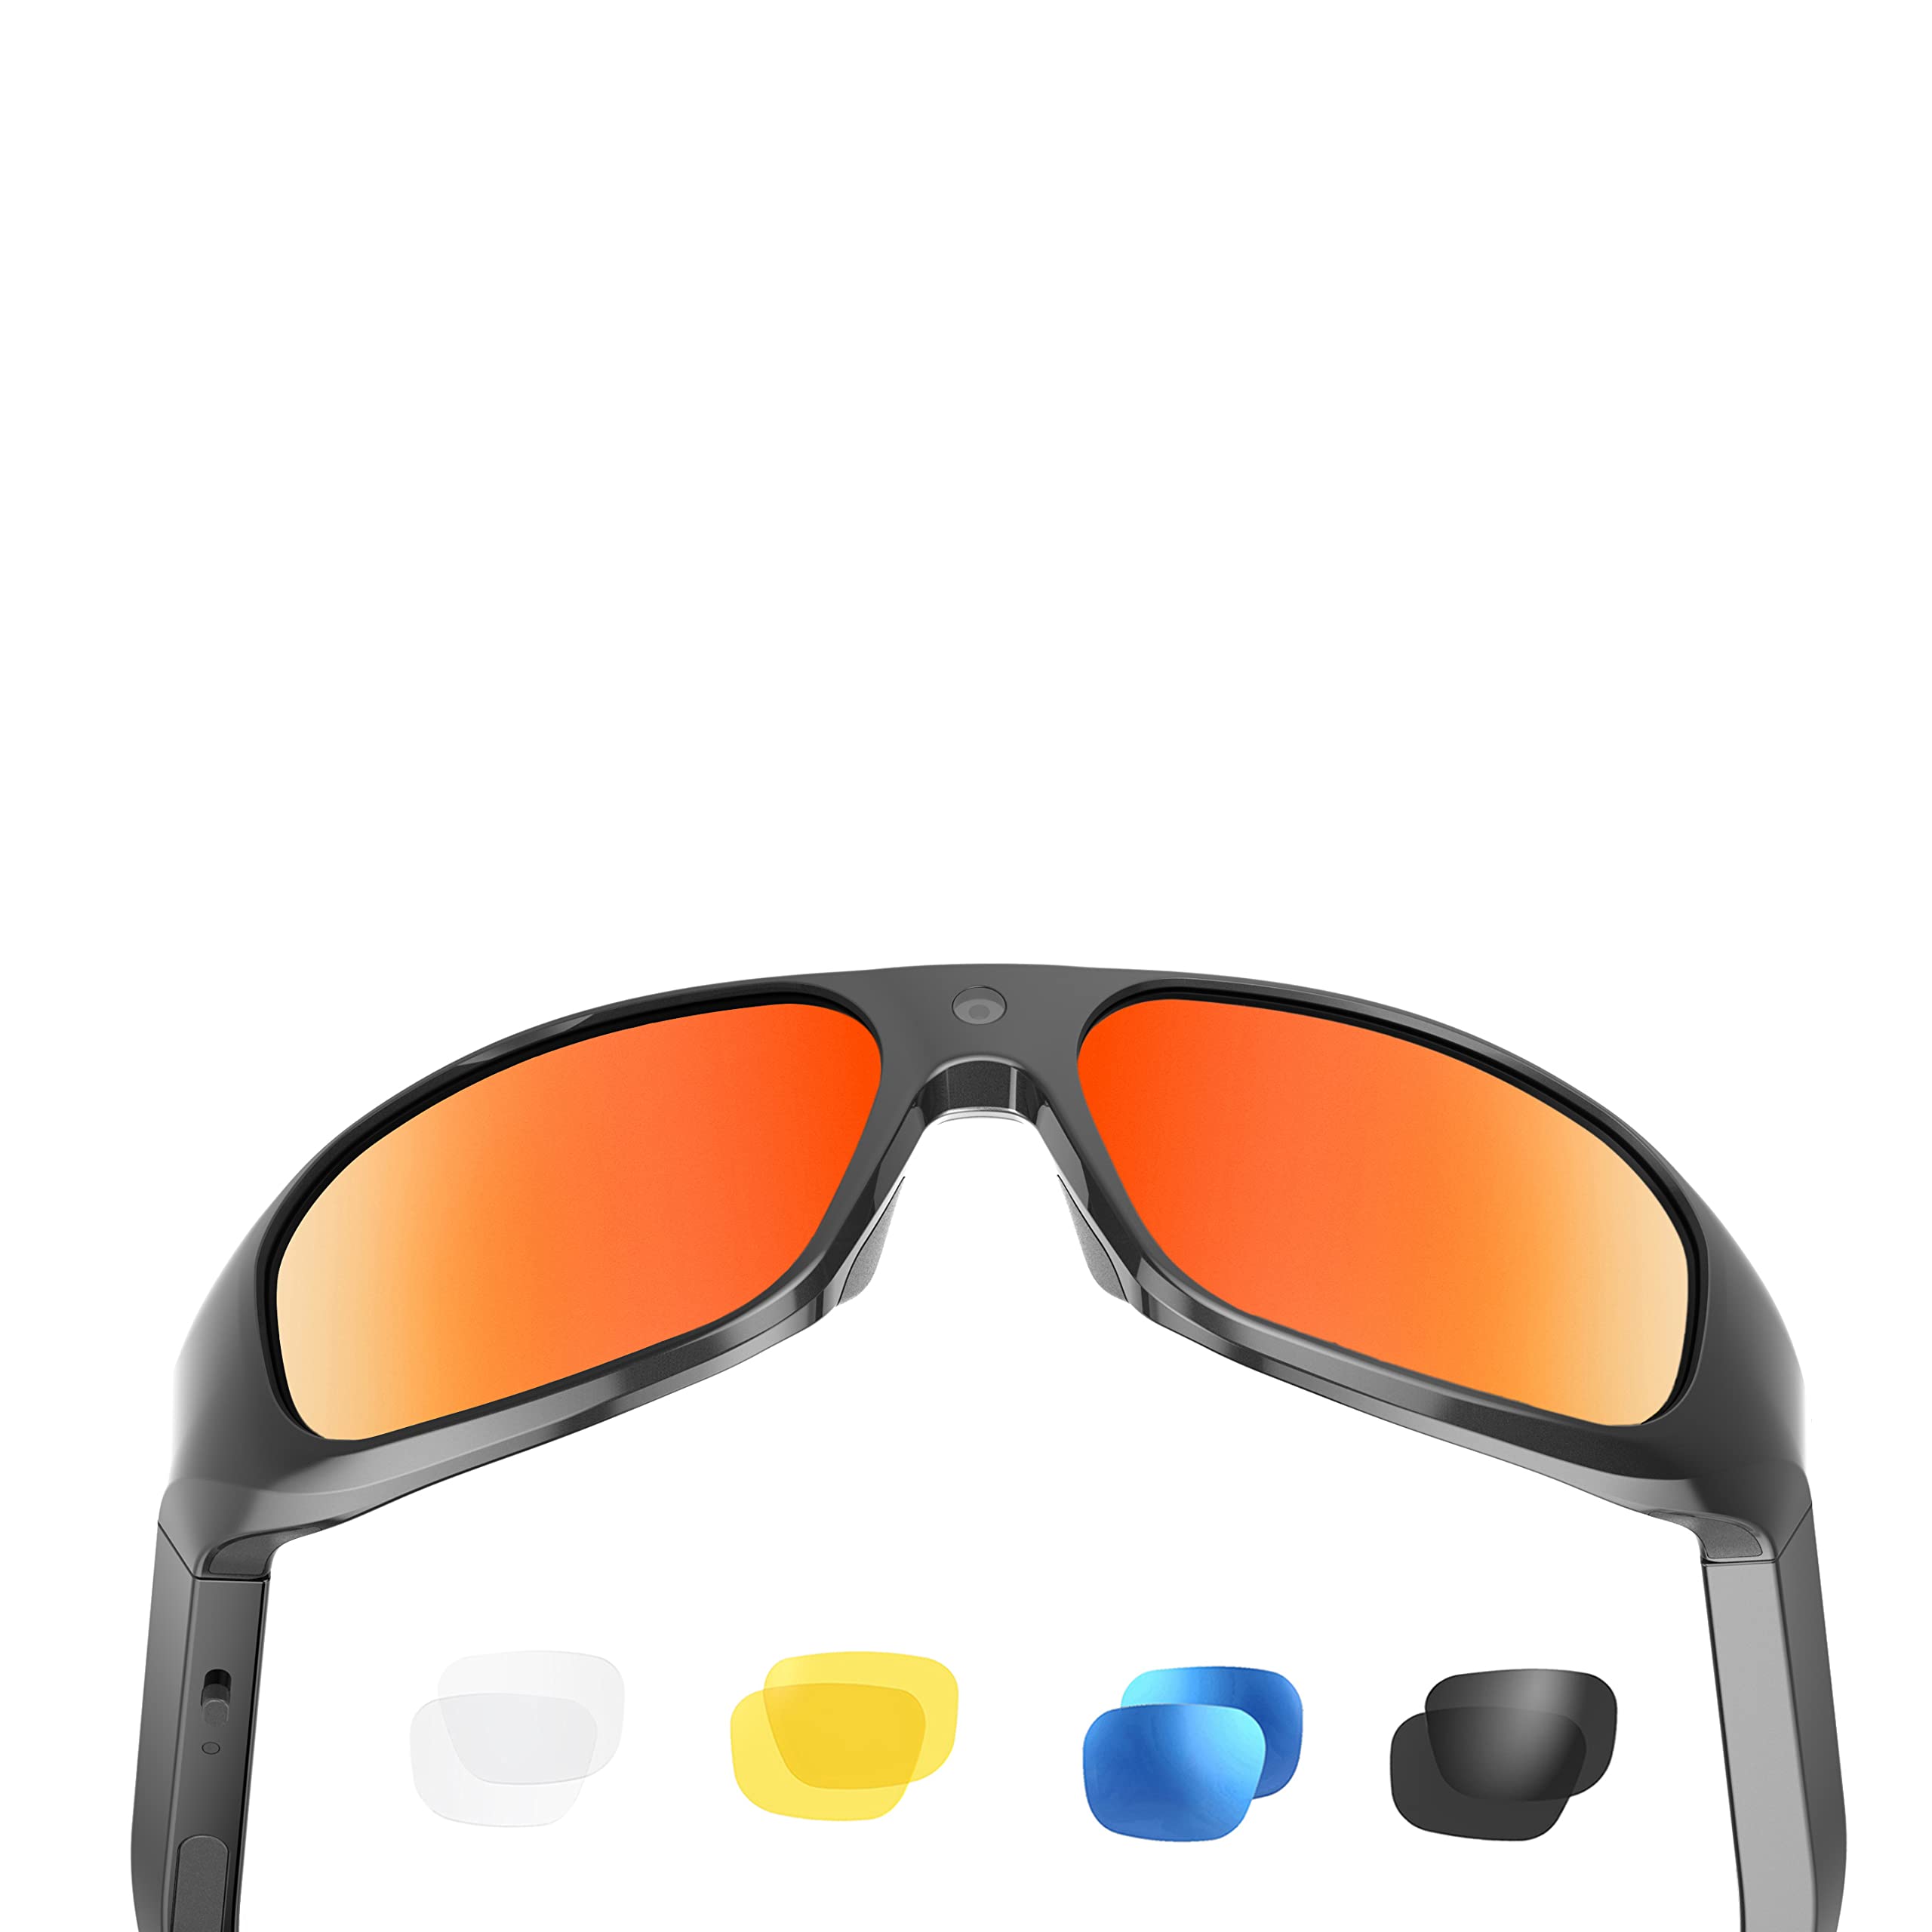 OhO Bluetooth Sunglasses,Voice Control and Open Ear Palestine | Ubuy